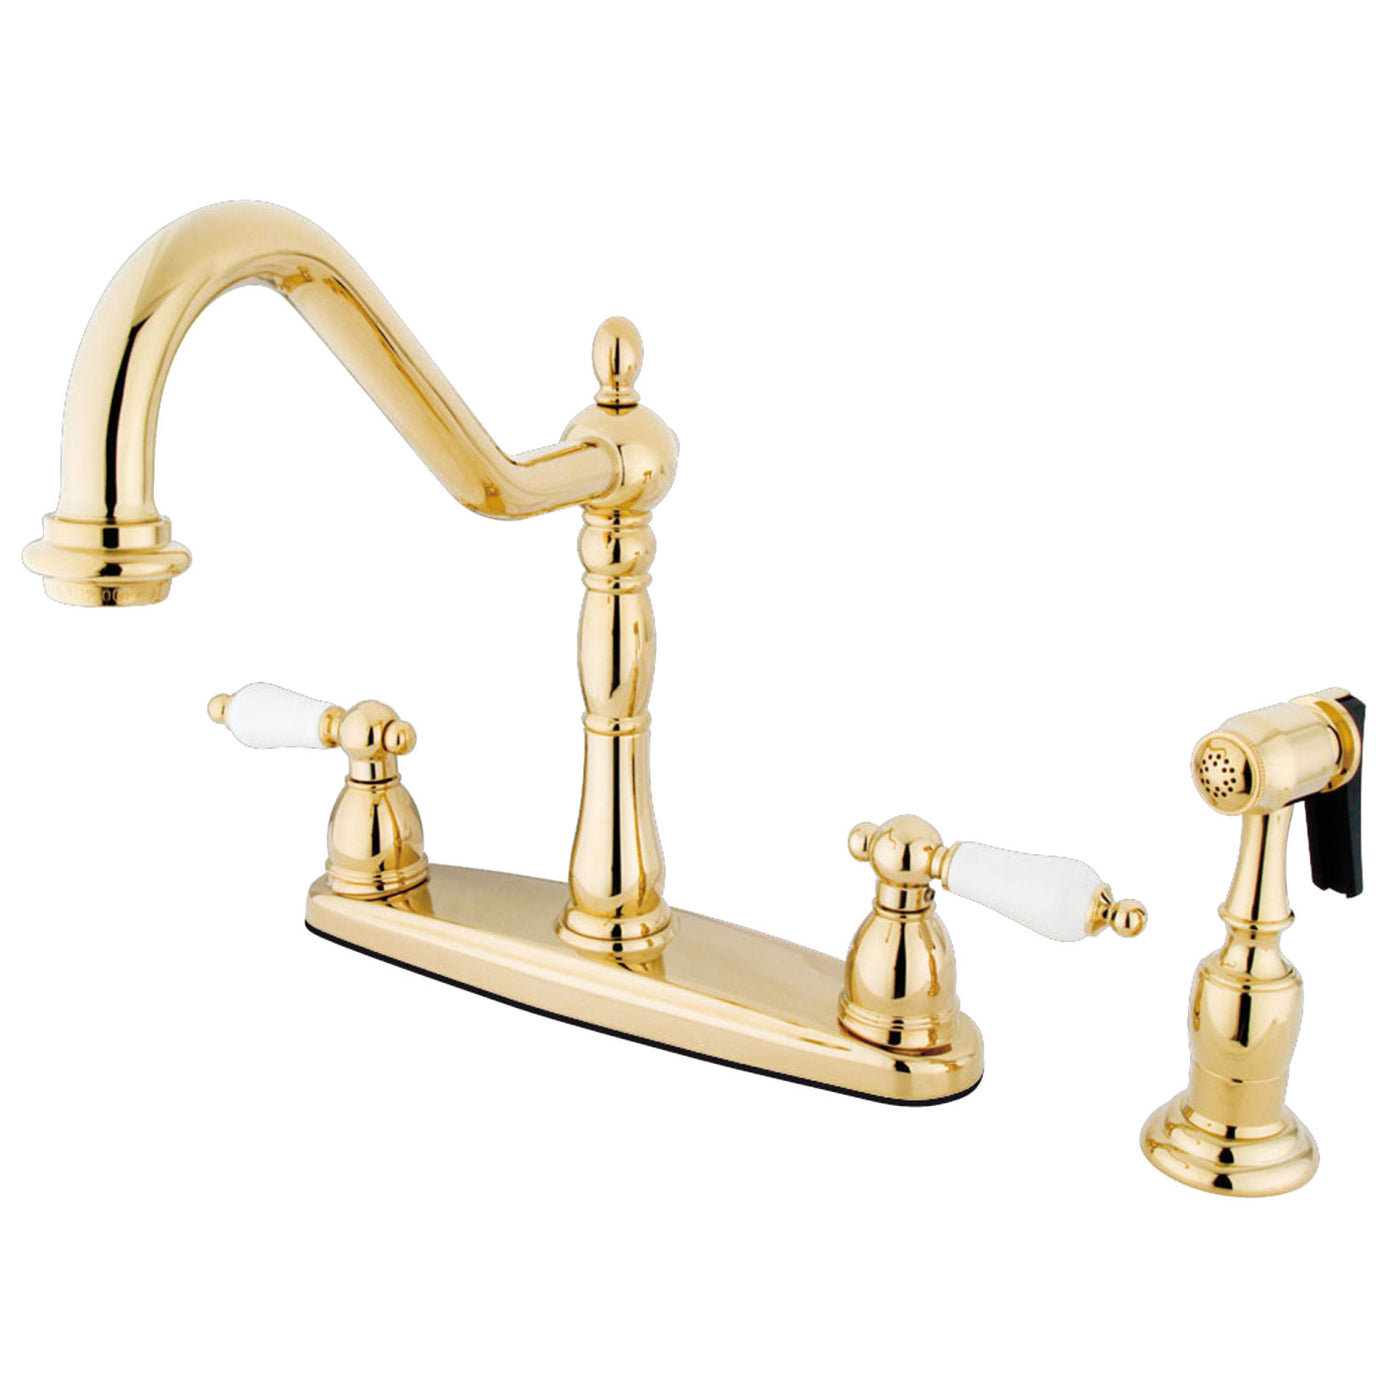 Elements of Design EB1752PLBS Centerset Kitchen Faucet with Brass Sprayer, Polished Brass